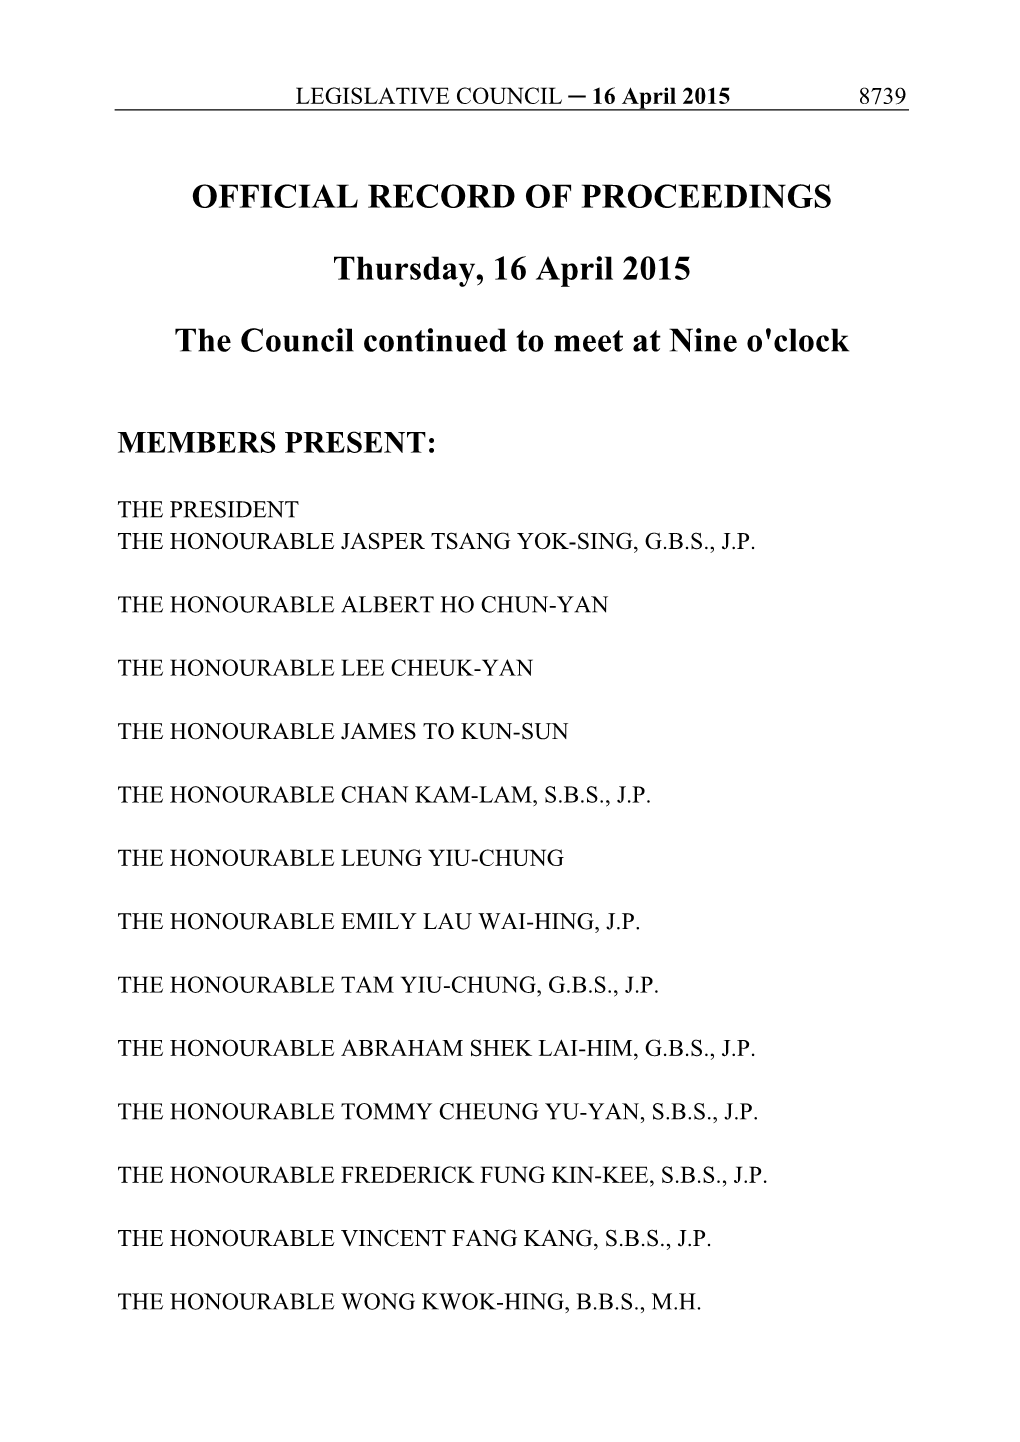 OFFICIAL RECORD of PROCEEDINGS Thursday, 16 April